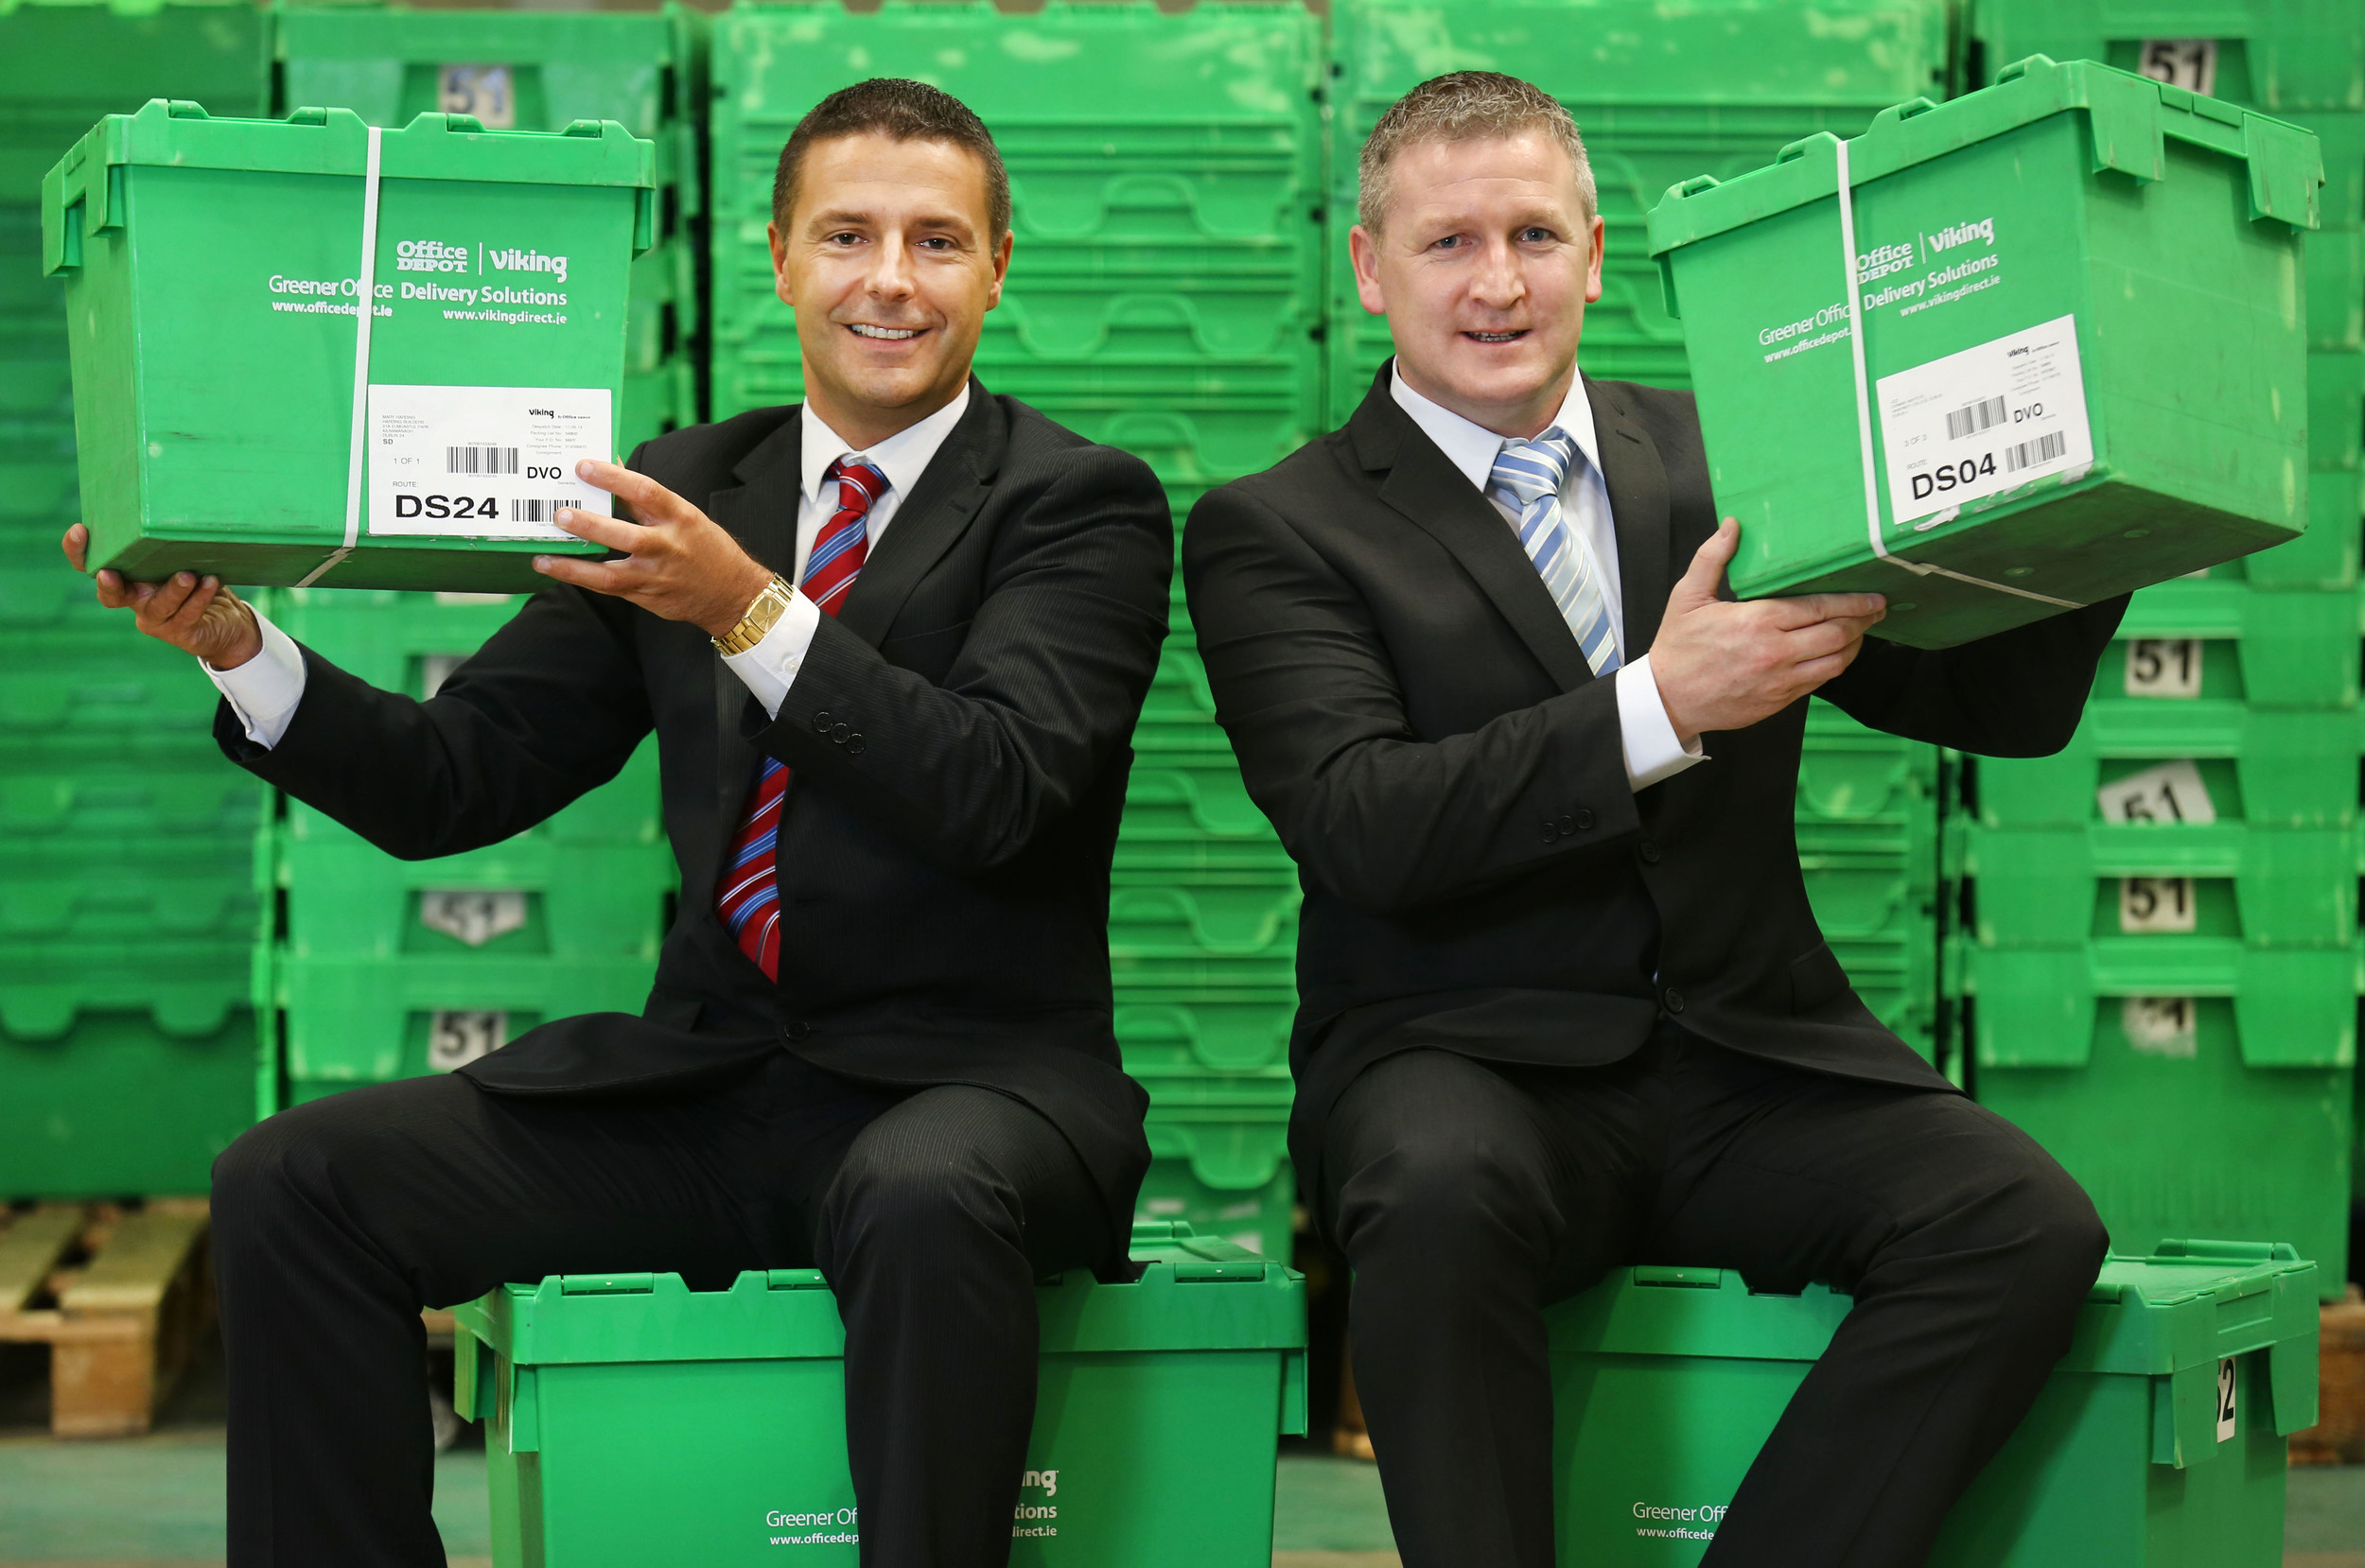  Michael Walby, Sales Director and Jason McCourt, Logistics Manager of Office Depot Ireland 